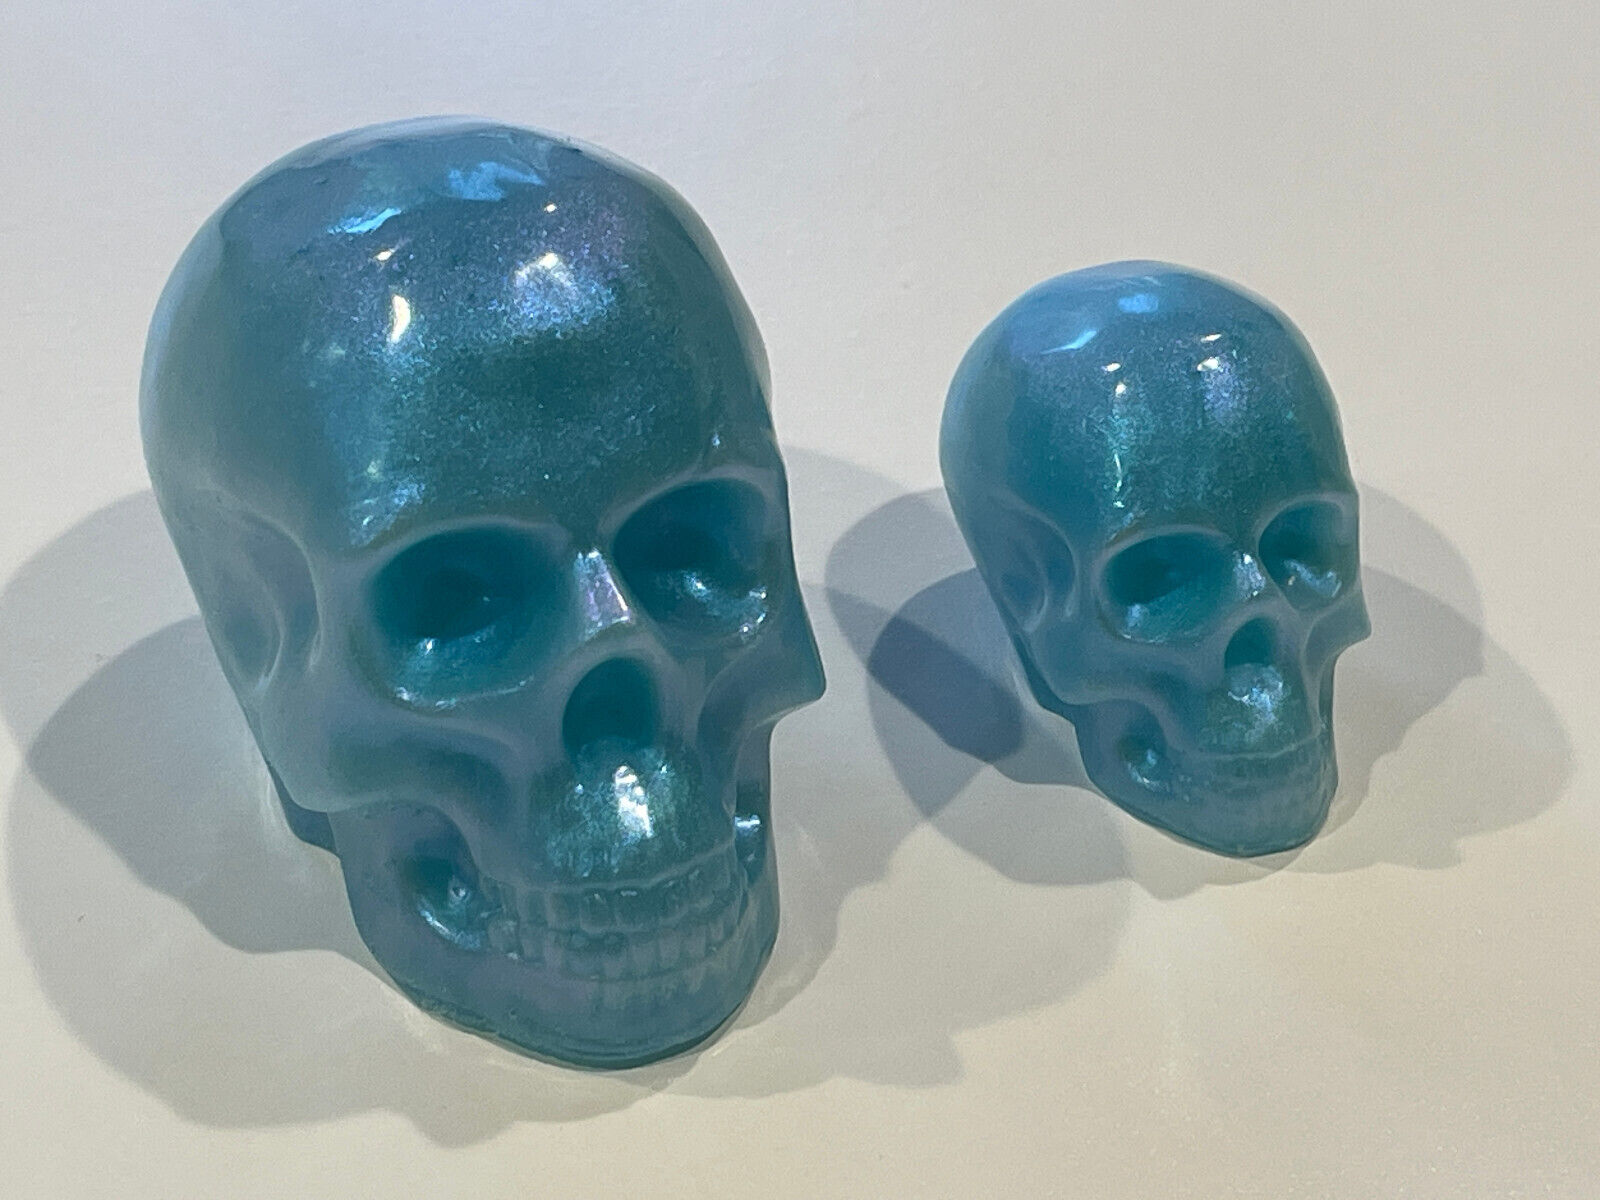 Matched pair Icy Blue Sparkle Solid Resin Skulls.  